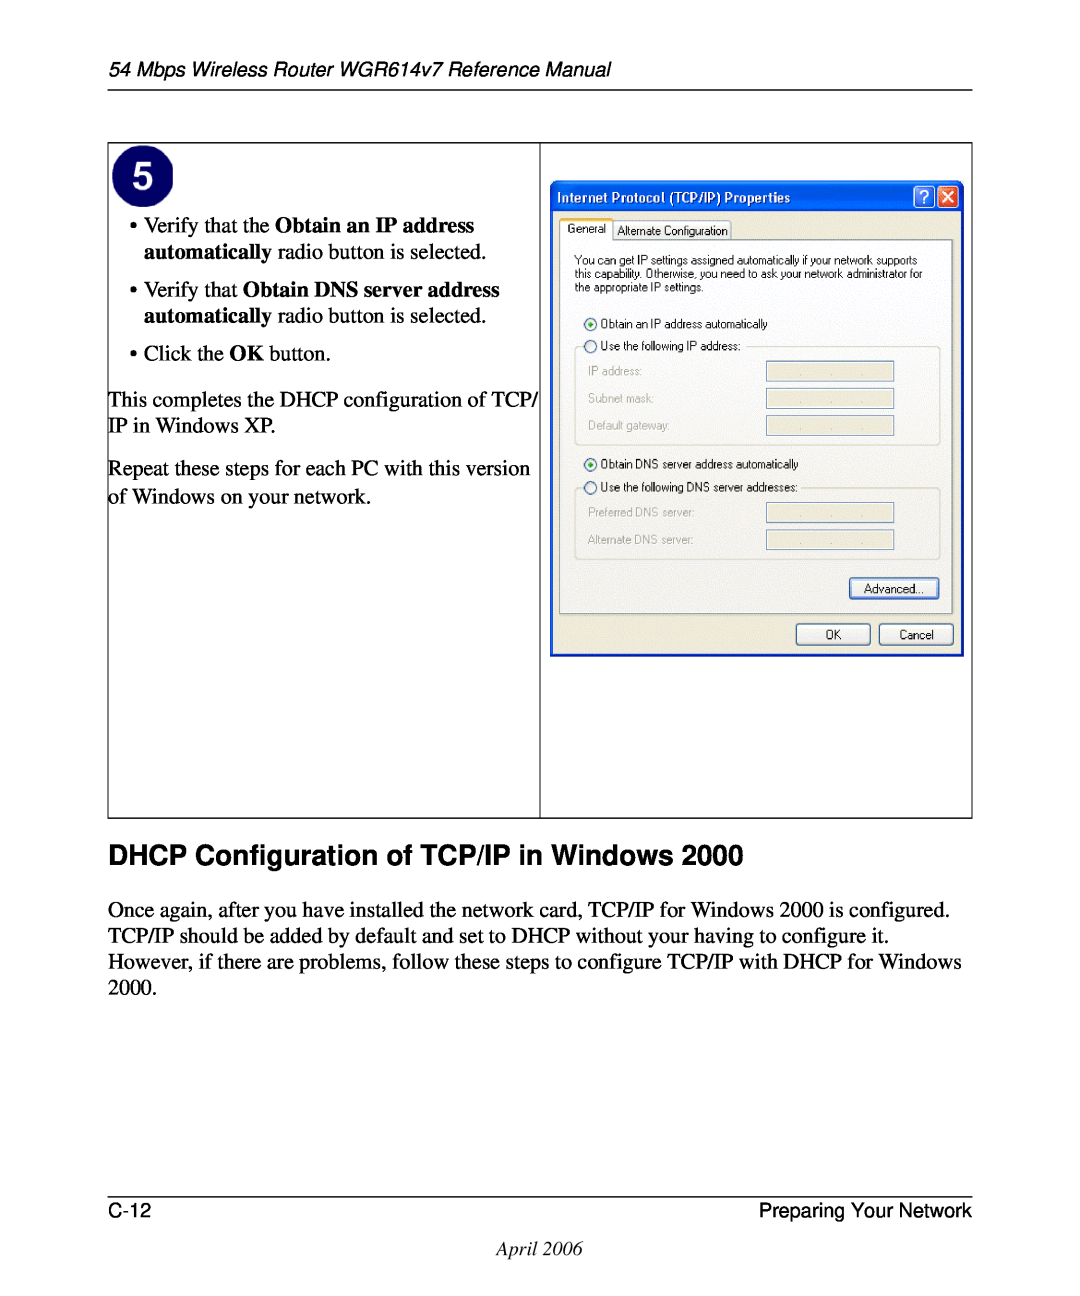 NETGEAR WGR614v7 manual DHCP Configuration of TCP/IP in Windows 